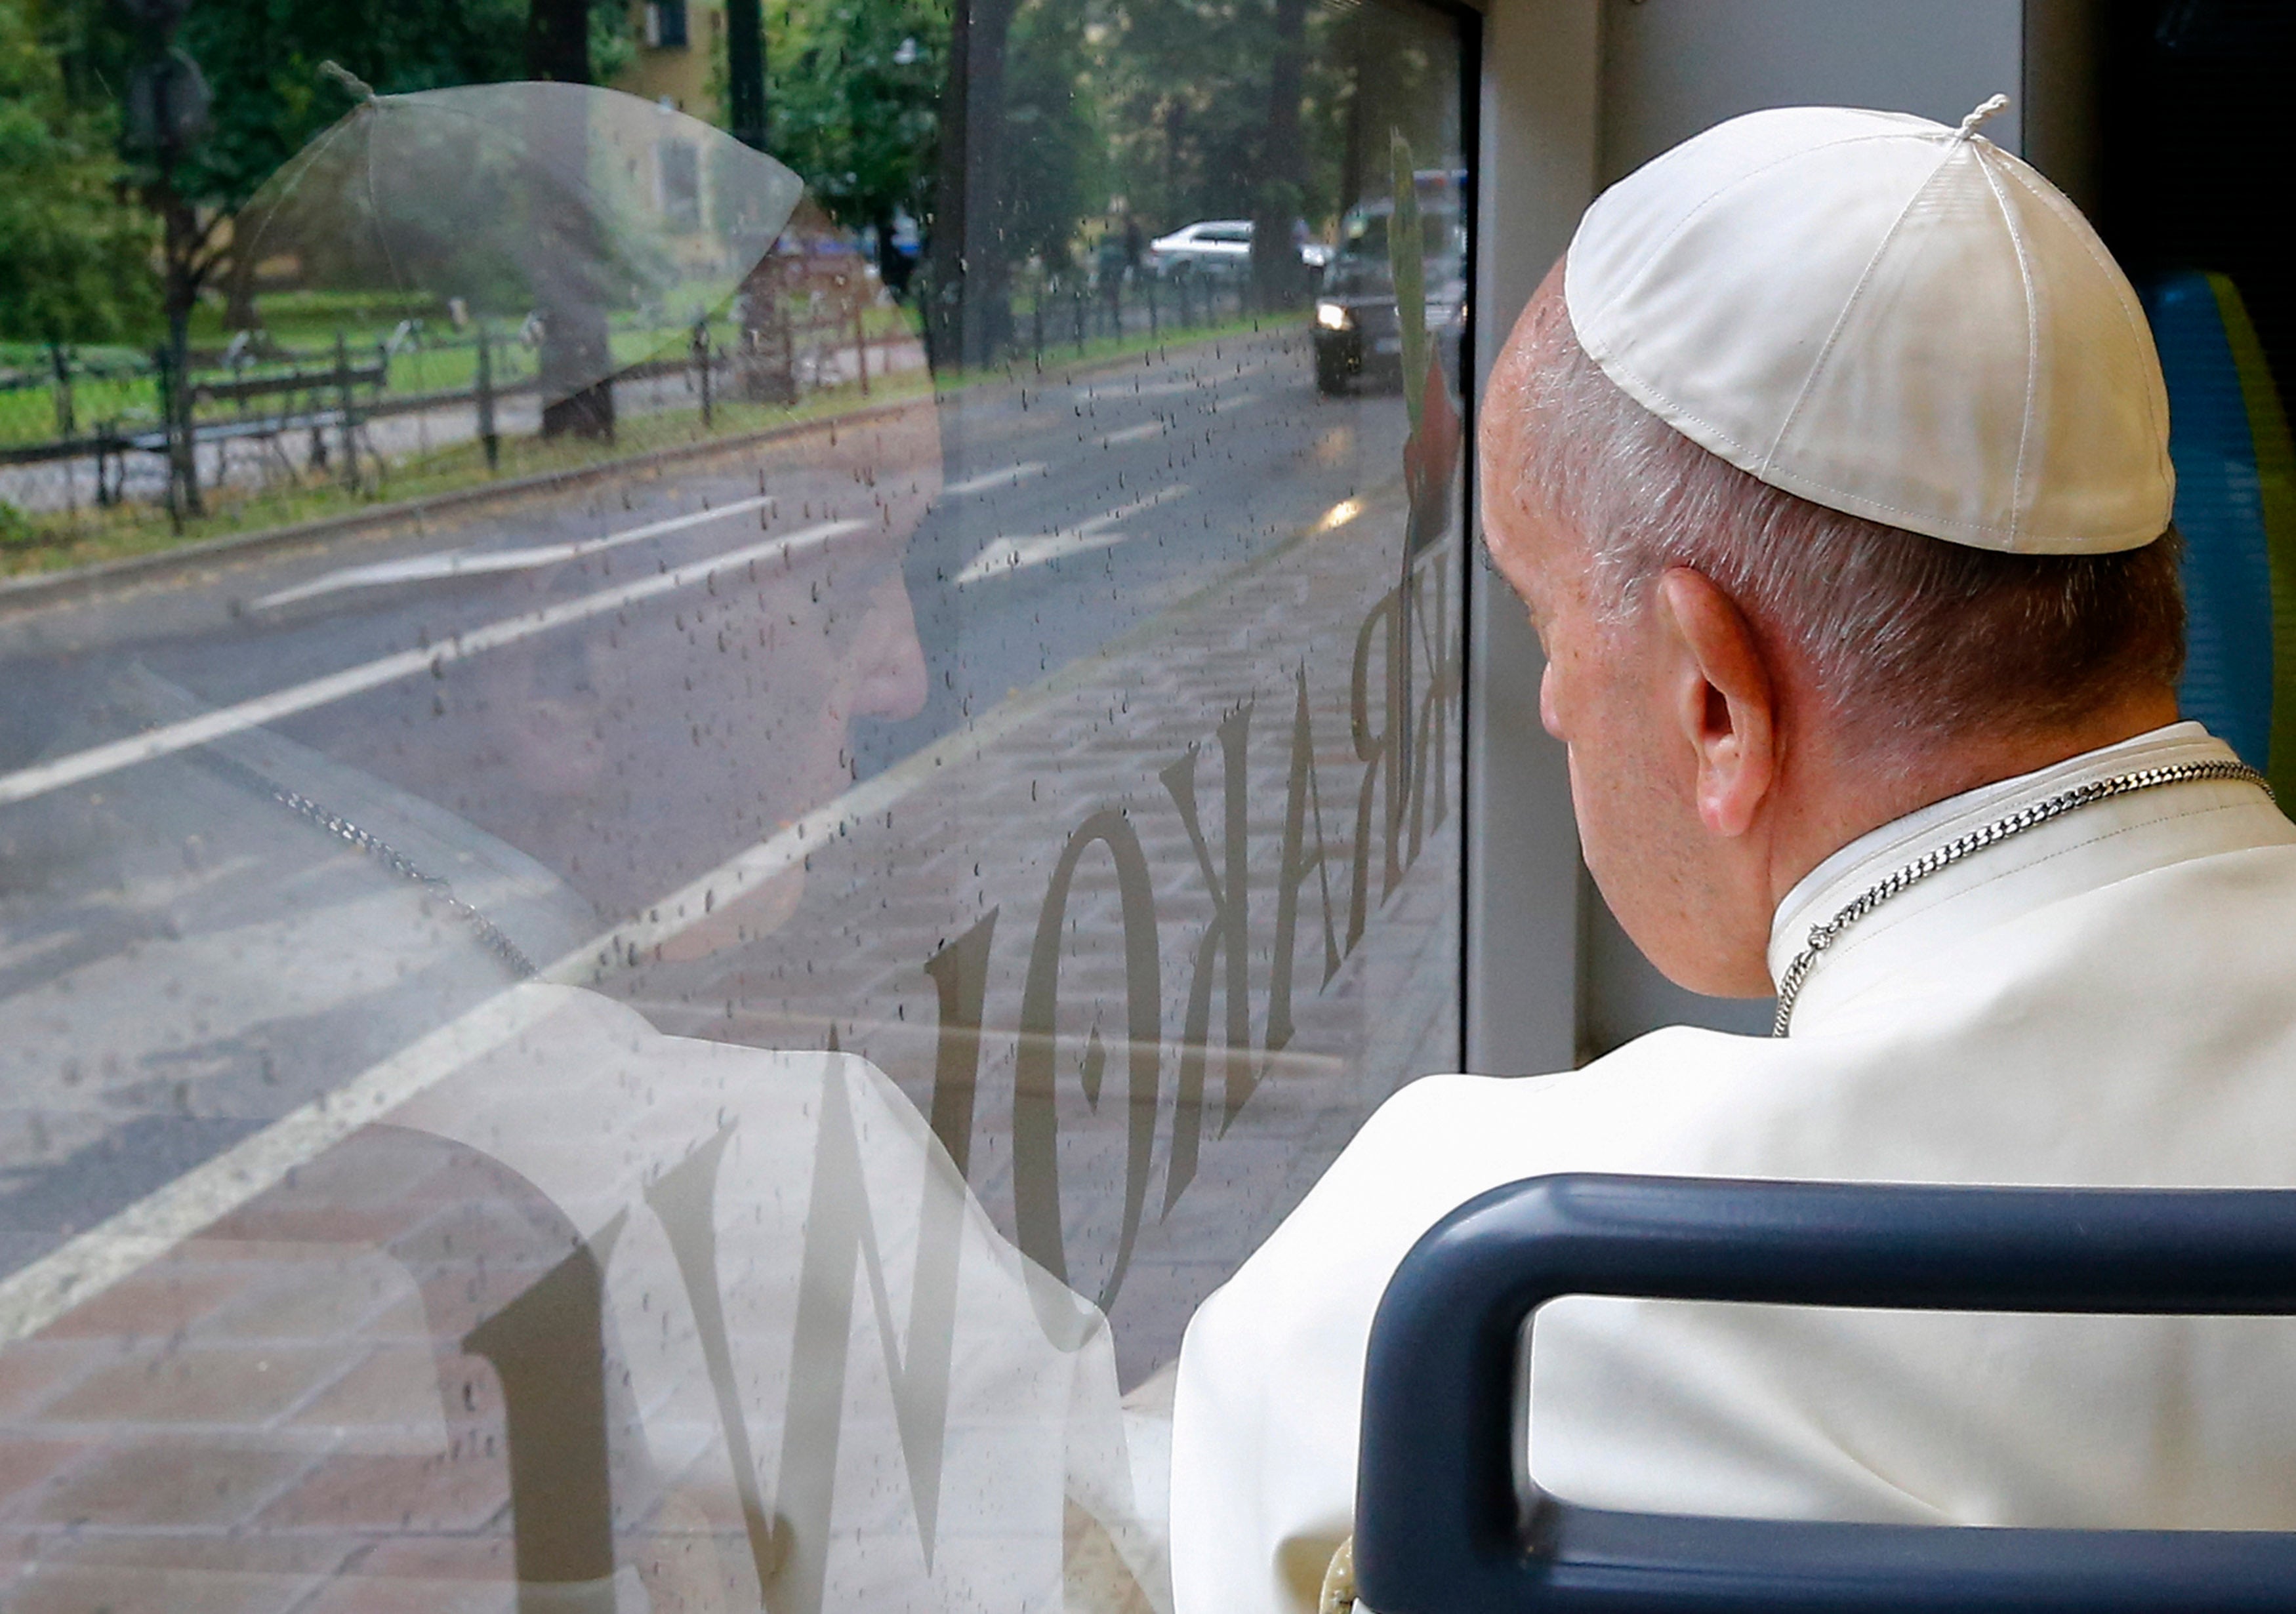 Pope Francis takes public transportation to the World Youth Days in Krakow, Poland, July 28, 2016. © 2016 Stefano Rellandini/Pool photo via AP